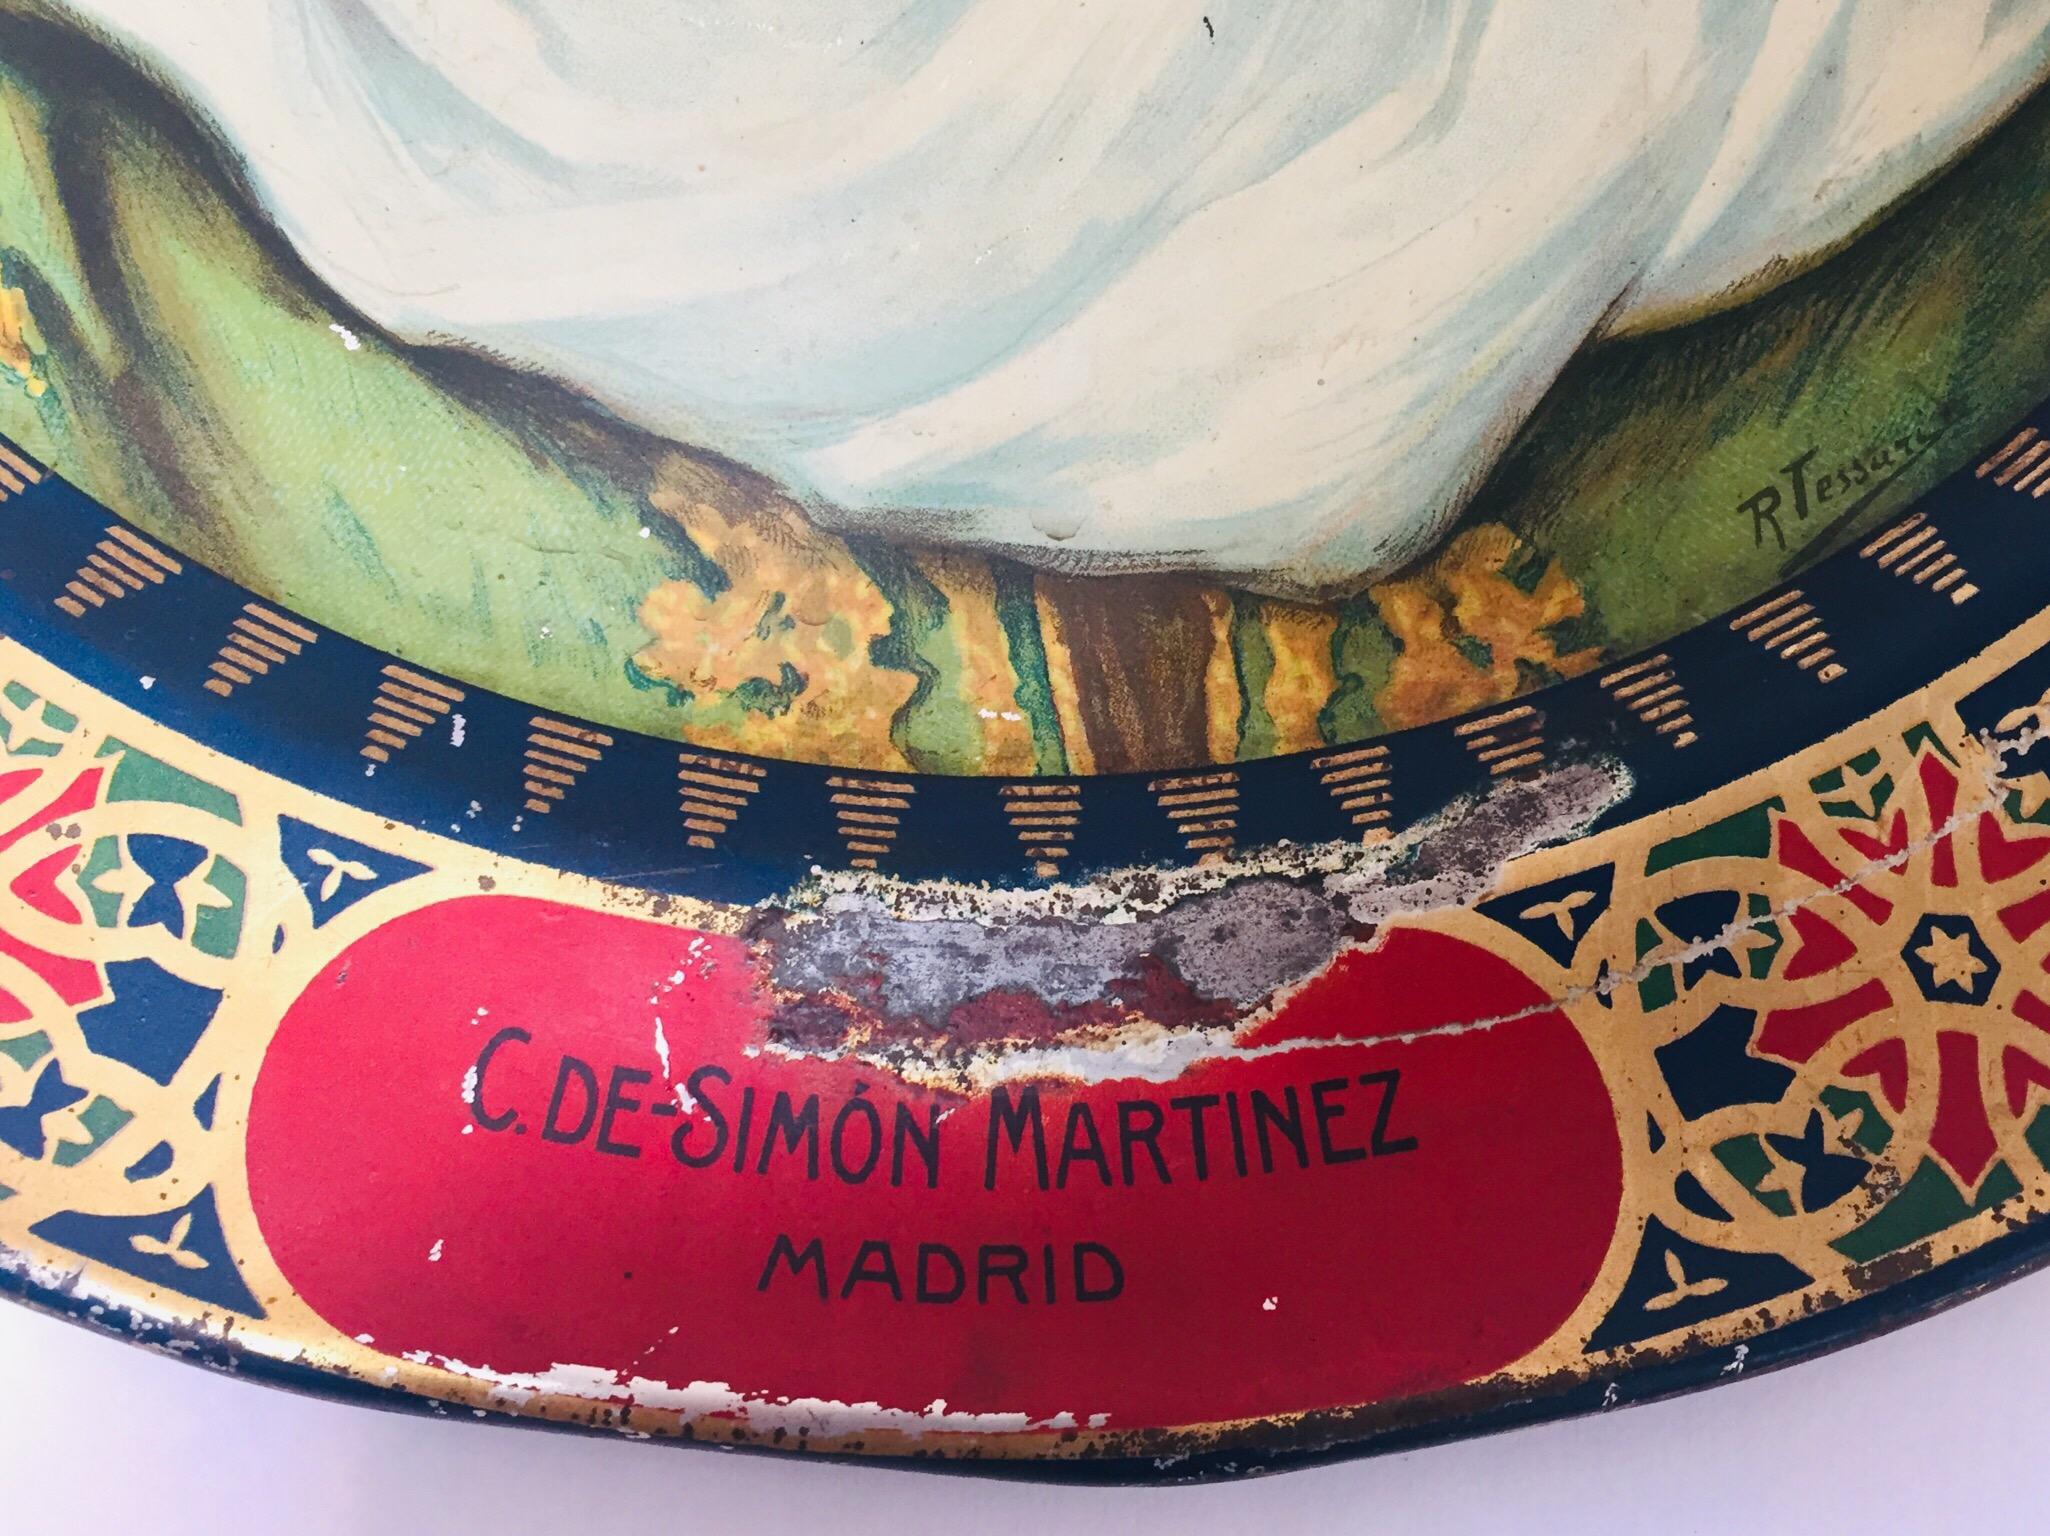 El Cafeto Metal Hanging Advertising Plate with a Moorish Prince 6